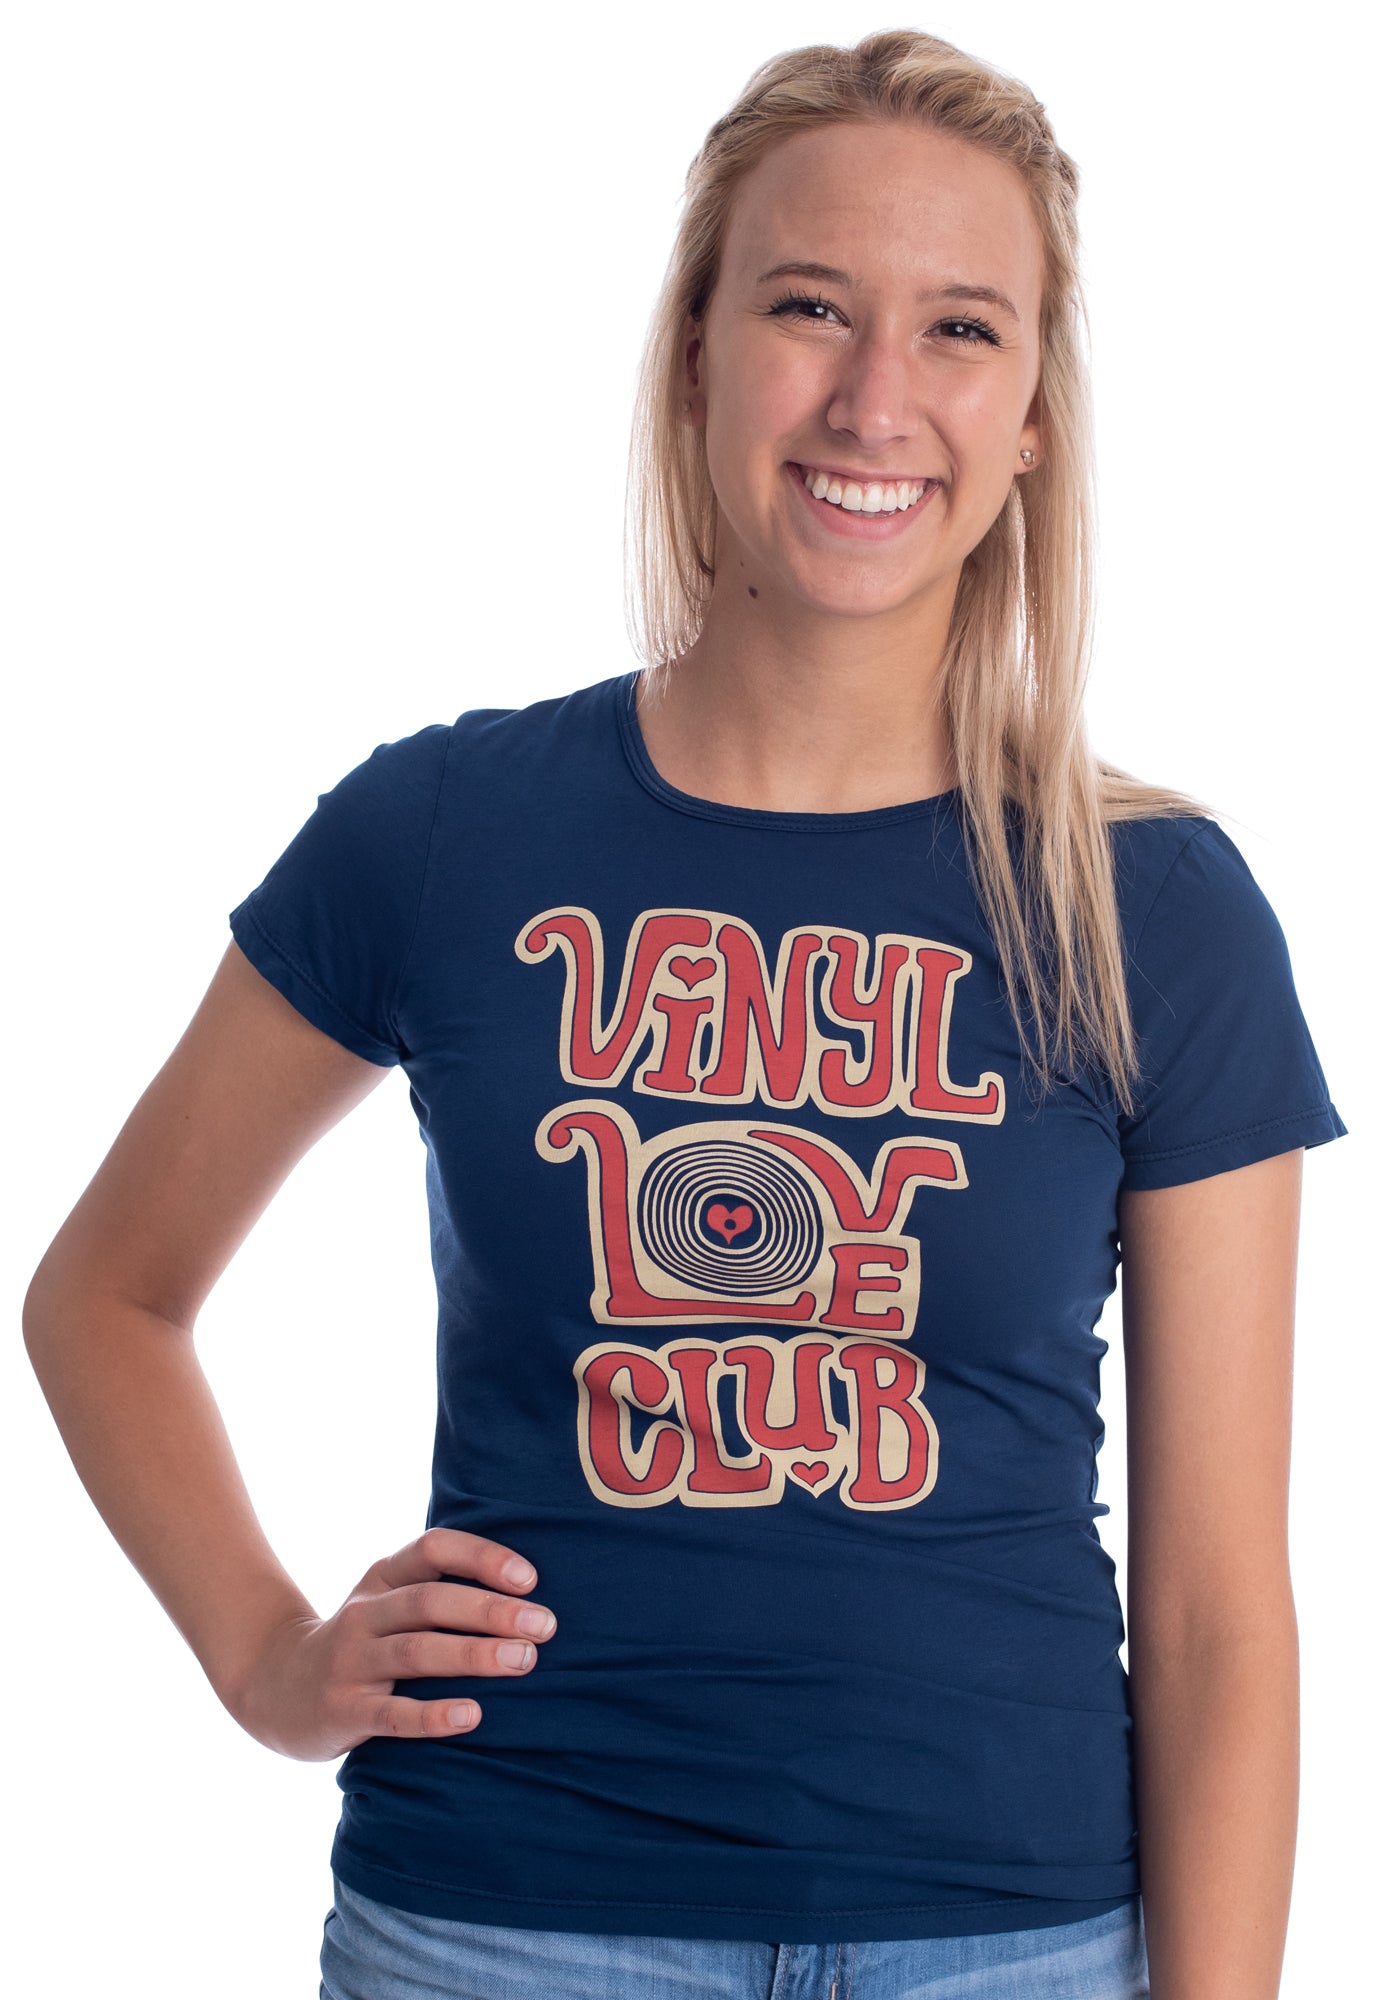 Navy blue graphic tee with "Vinyl Love Club" text in red and off white on blonde model